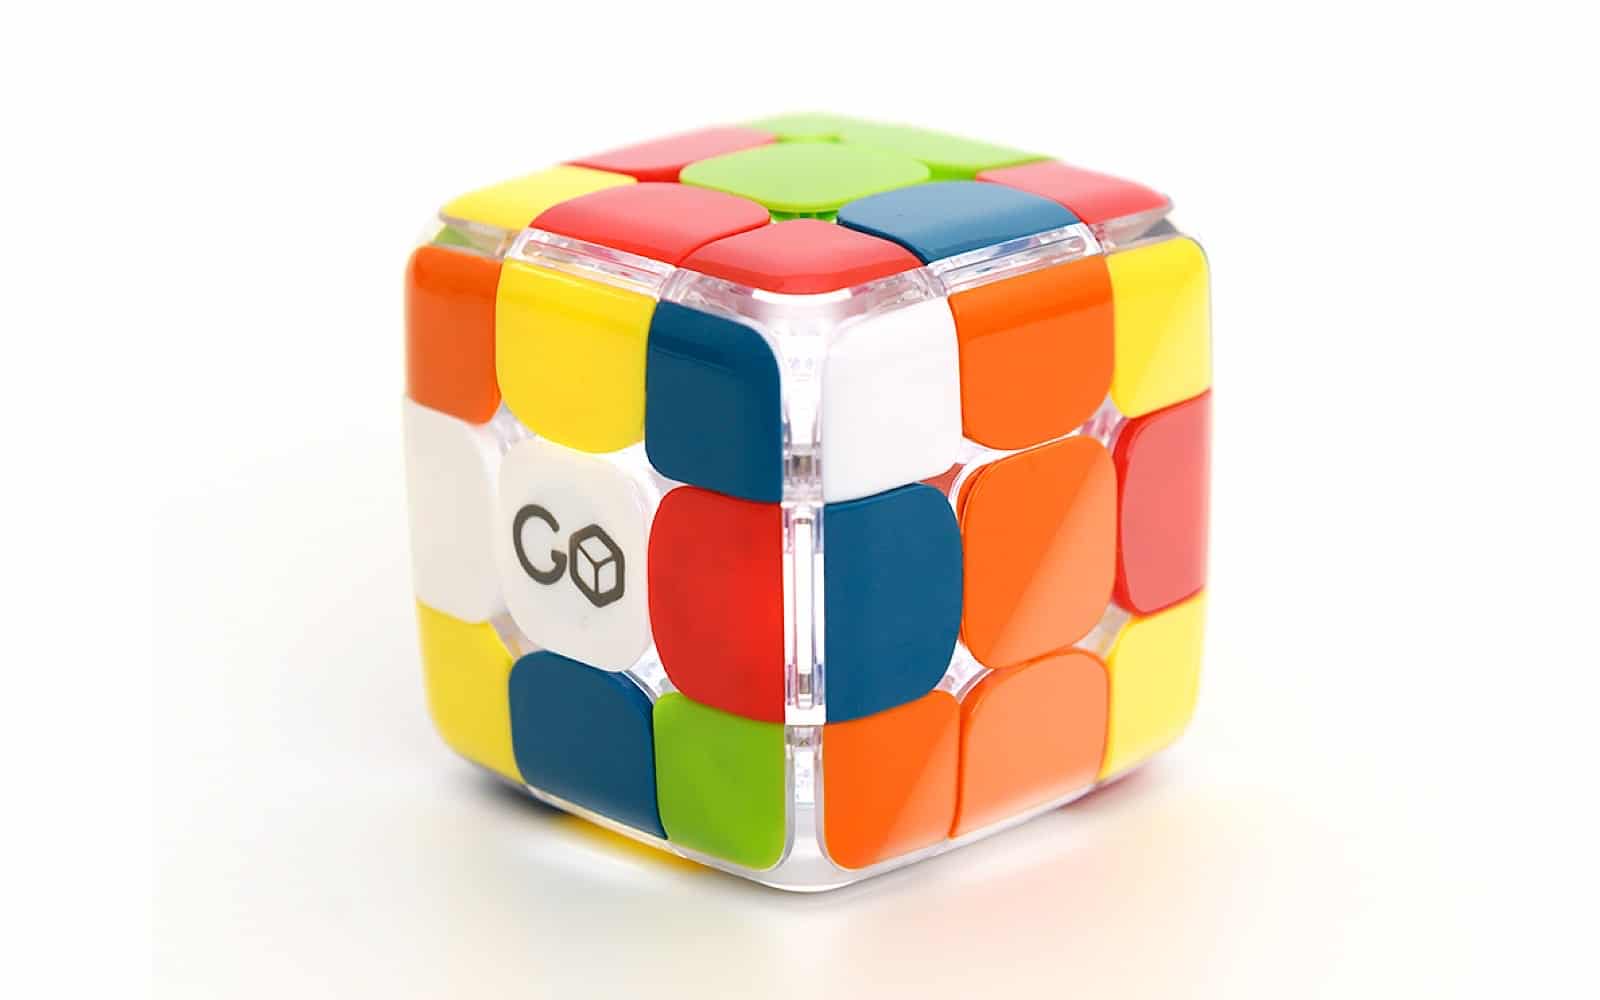 Go Cube is a new style of Rubik's Cube